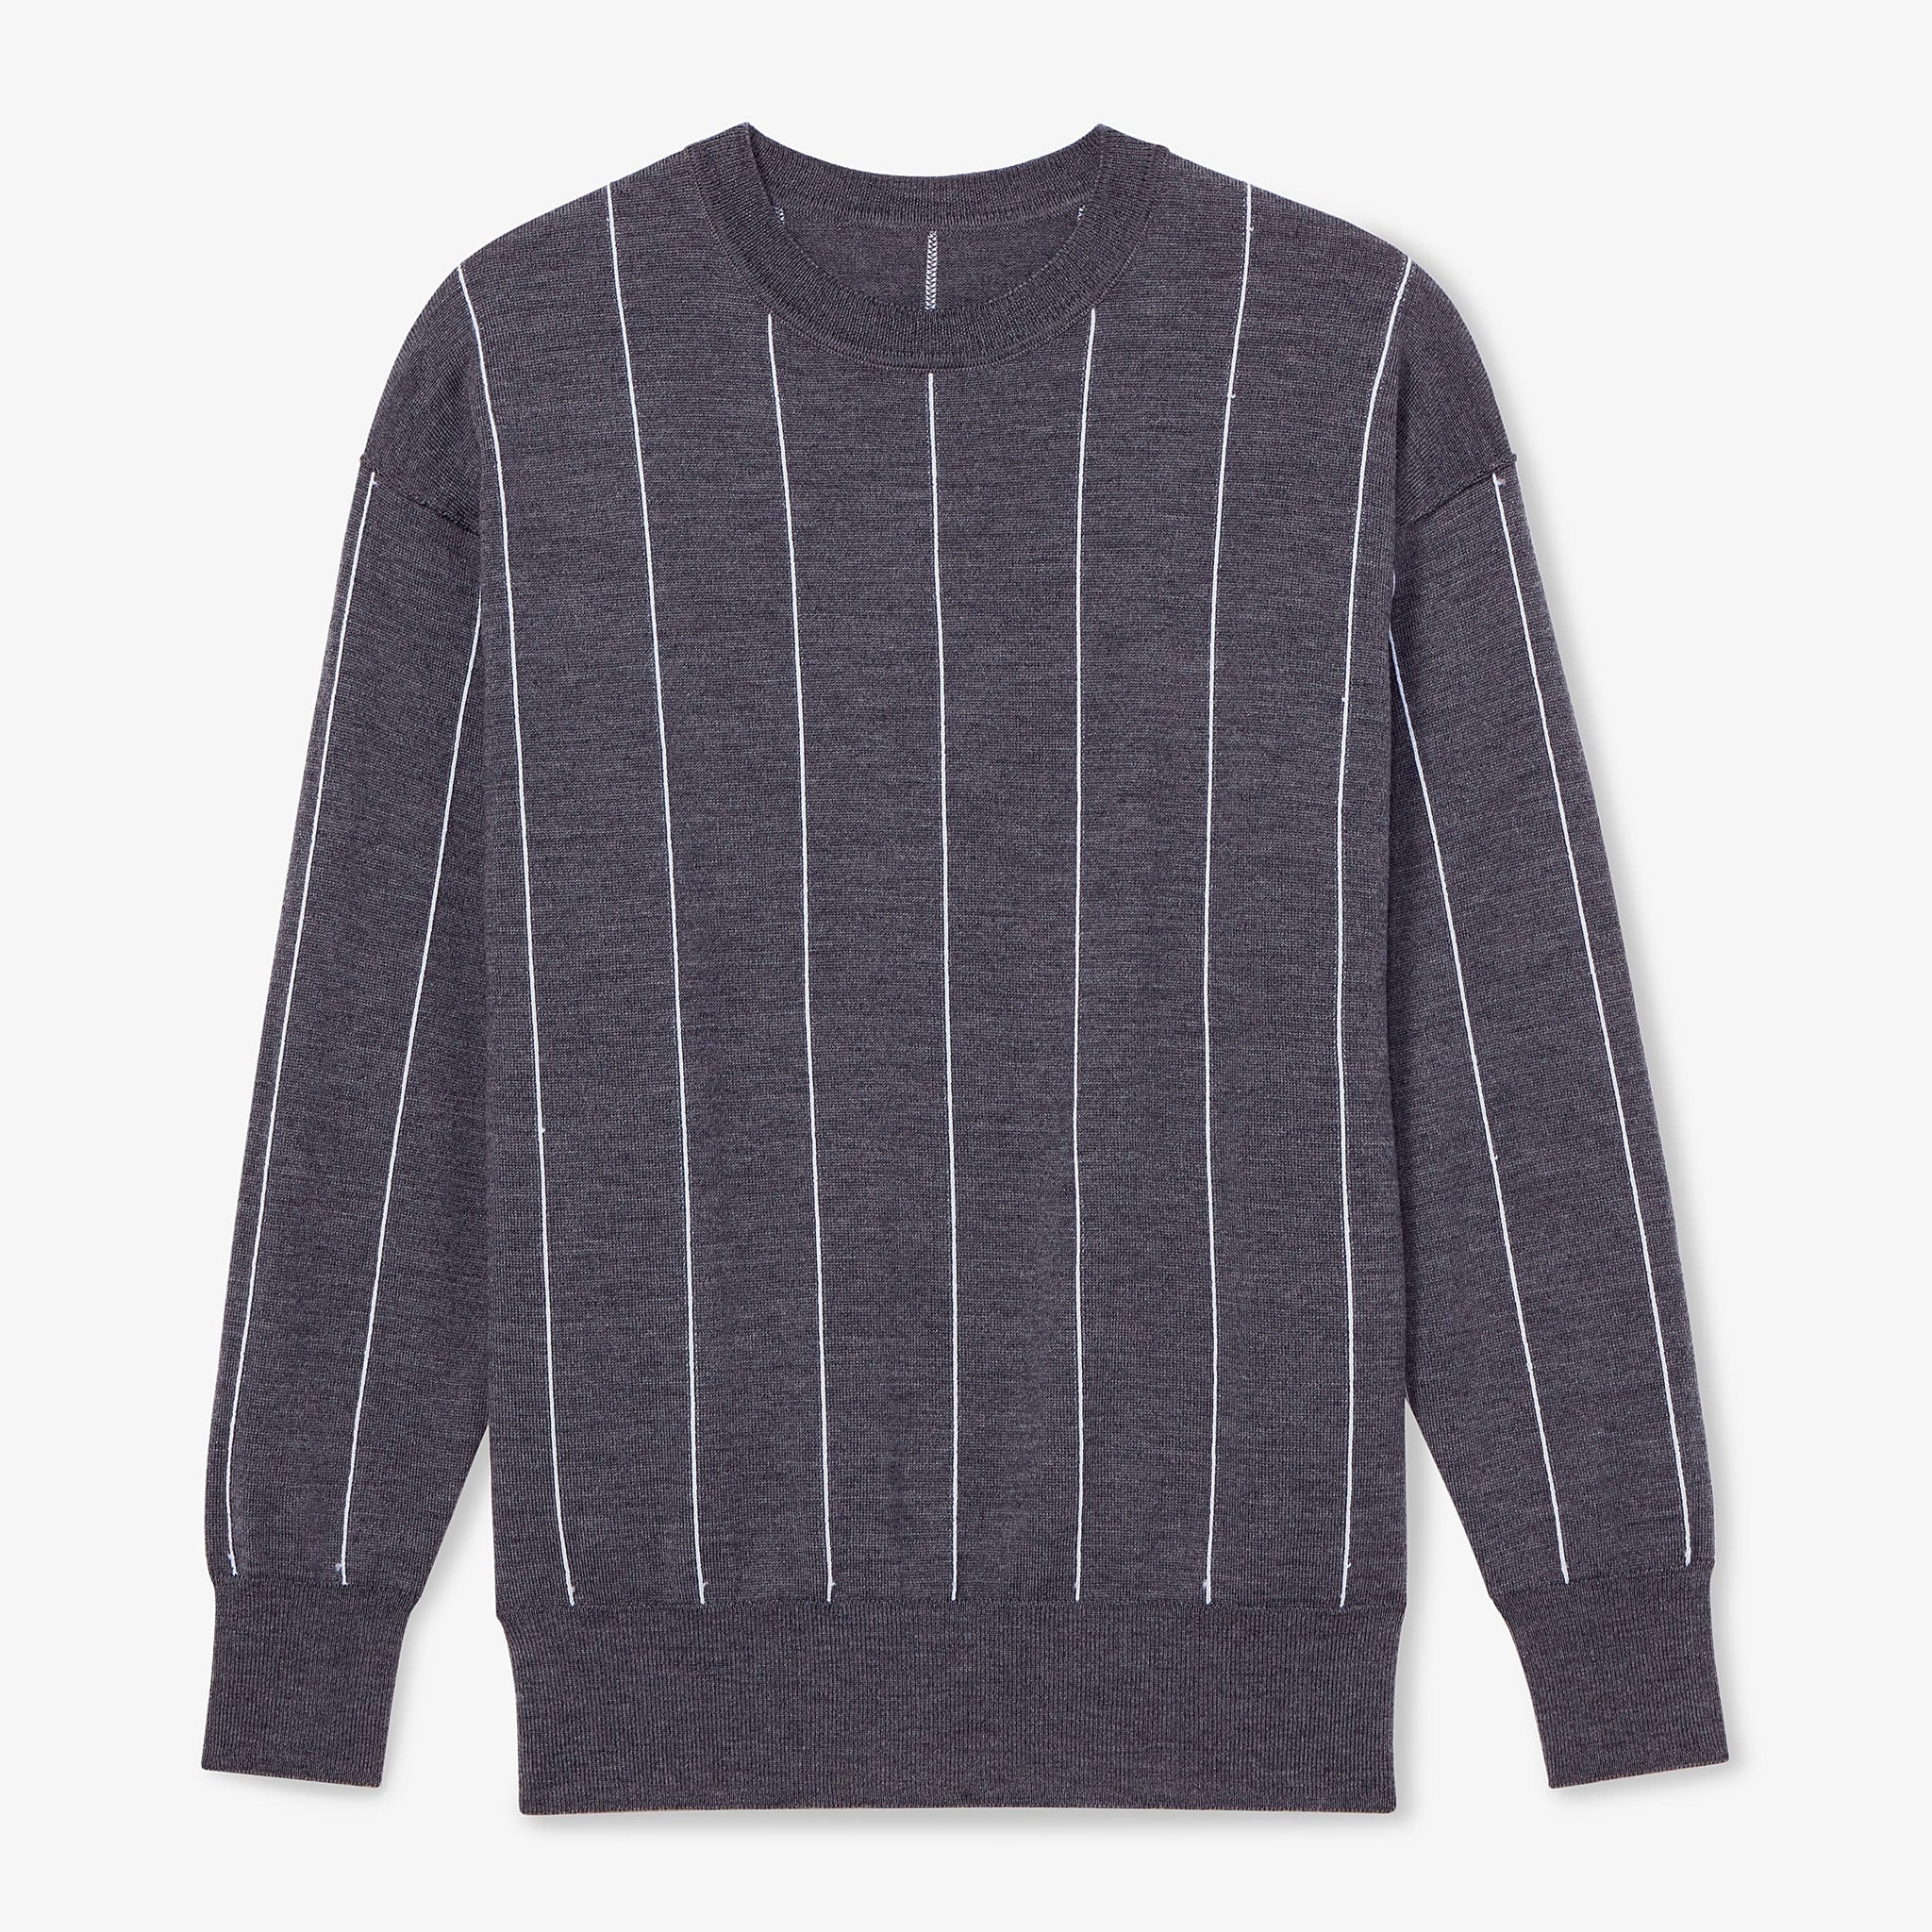 Packshot image of the Ingola Sweater—Braided Stripe in Charcoal / Ivory